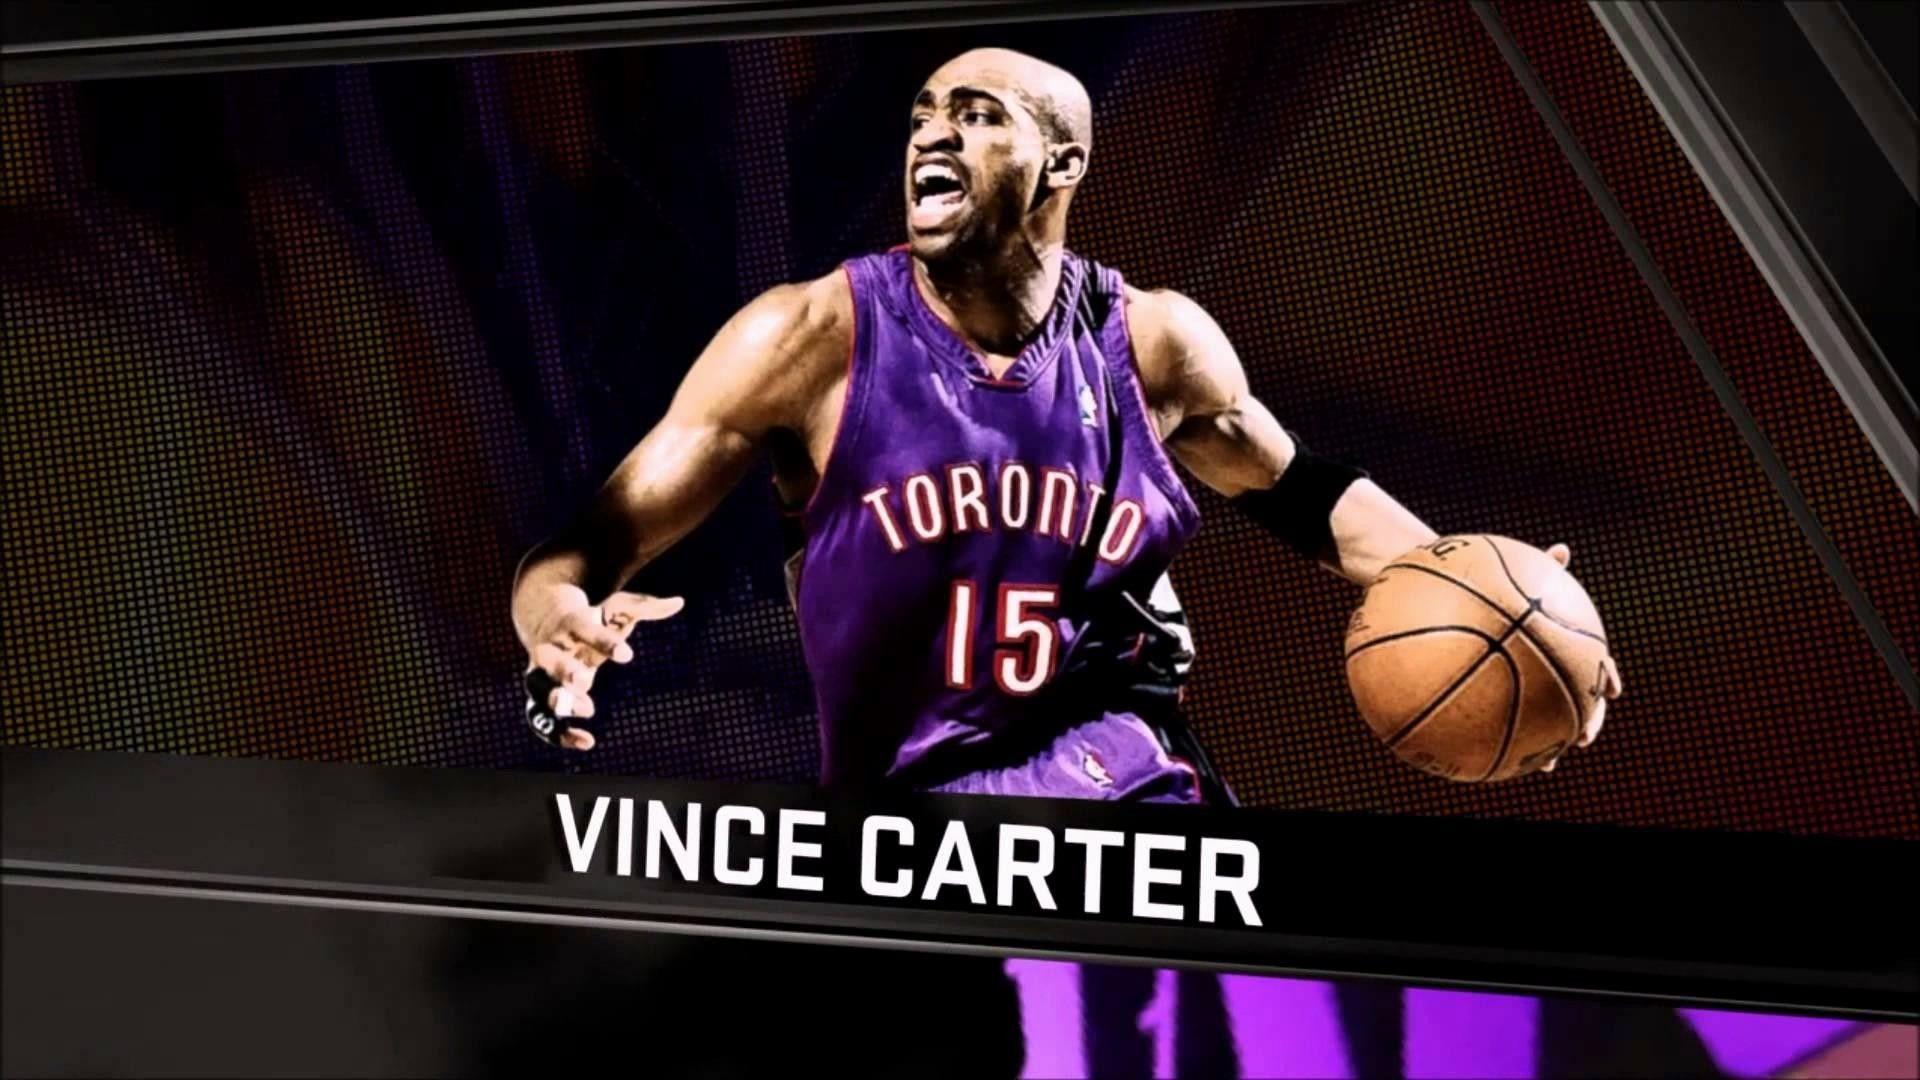 I made a Vince Carter wallpaper [1080p] and thought I'd share it